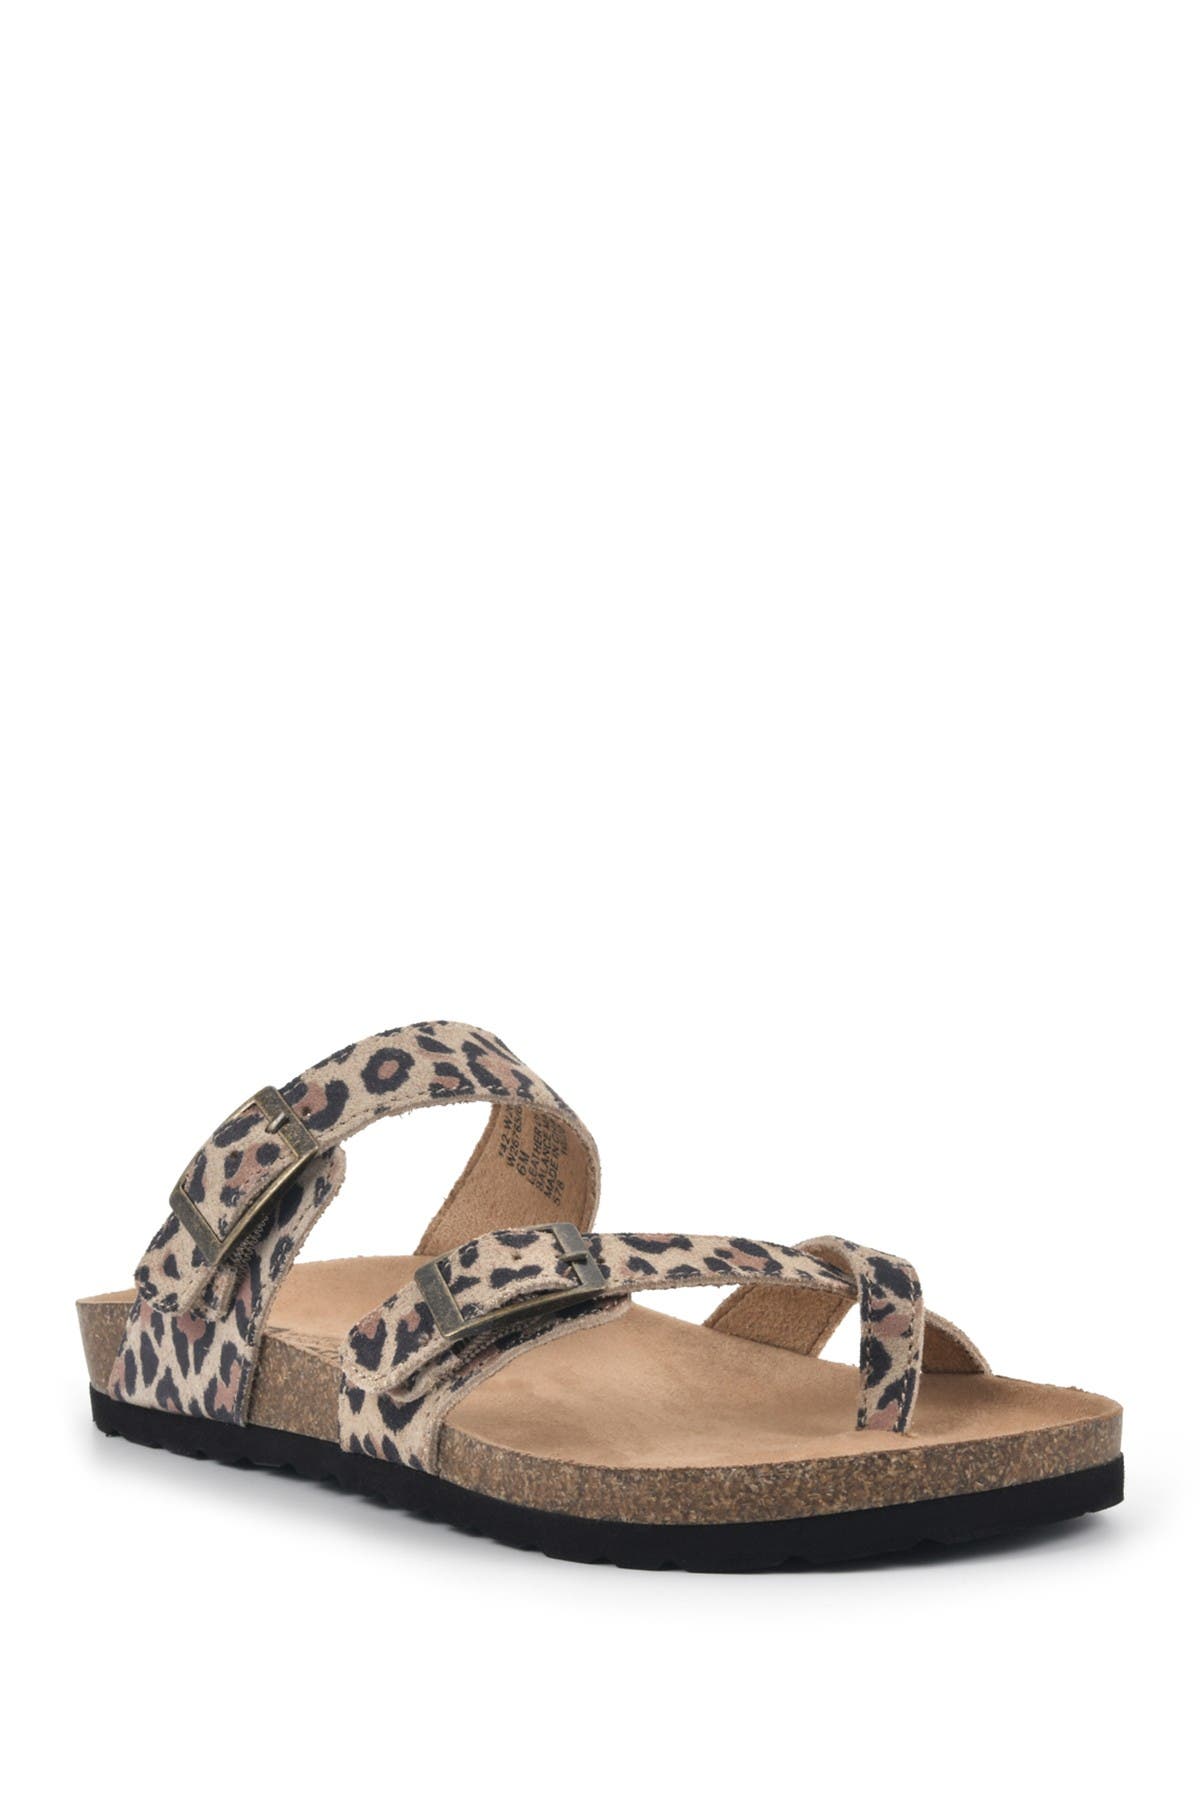 White Mountain Footwear Gracie Double Buckle Sandal In Natural/e-print/leat